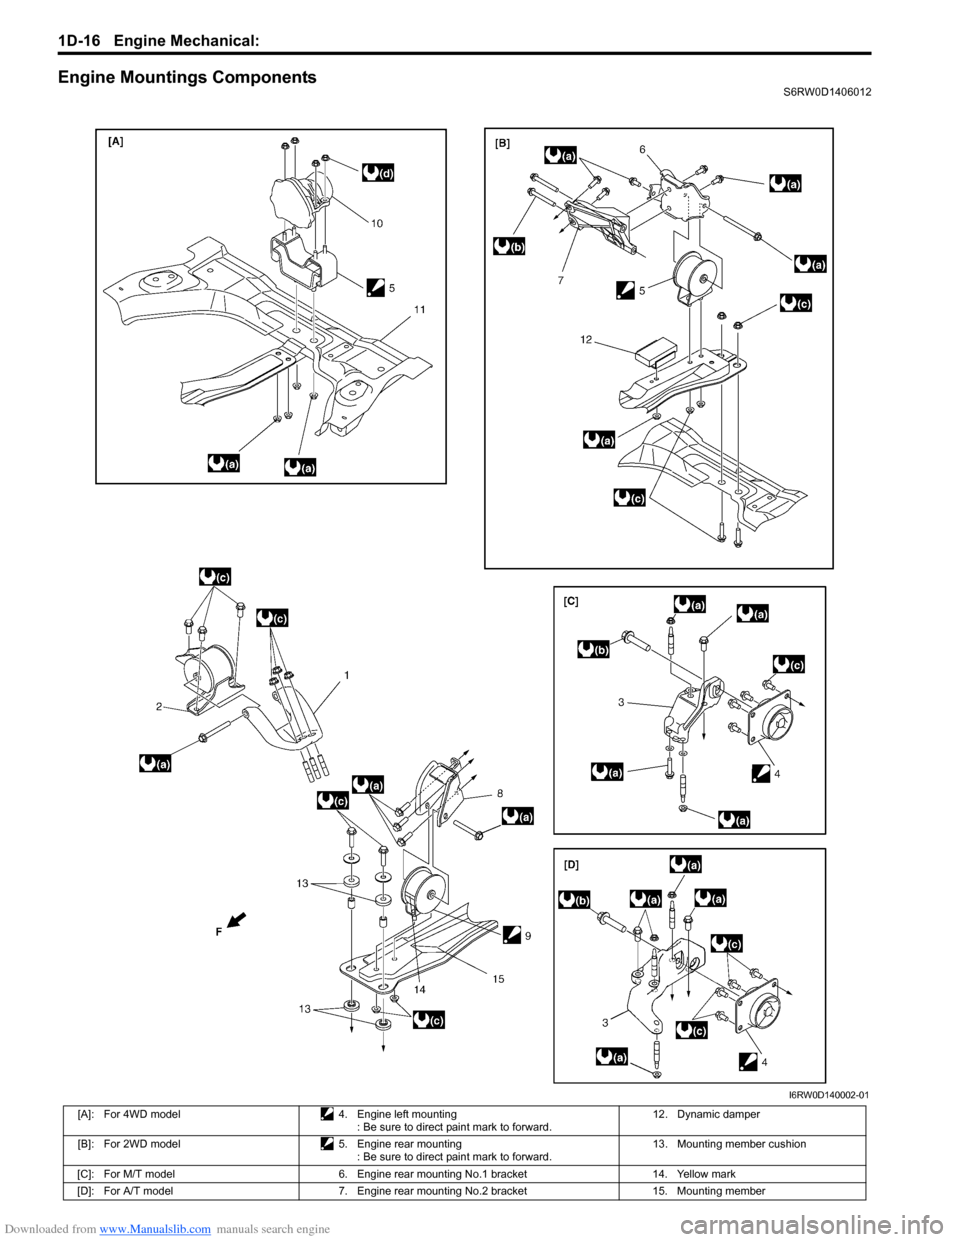 SUZUKI SX4 2006 1.G Service Workshop Manual Downloaded from www.Manualslib.com manuals search engine 1D-16 Engine Mechanical: 
Engine Mountings ComponentsS6RW0D1406012
I6RW0D140002-01
[A]: For 4WD model 4. Engine left mounting
: Be sure to dire